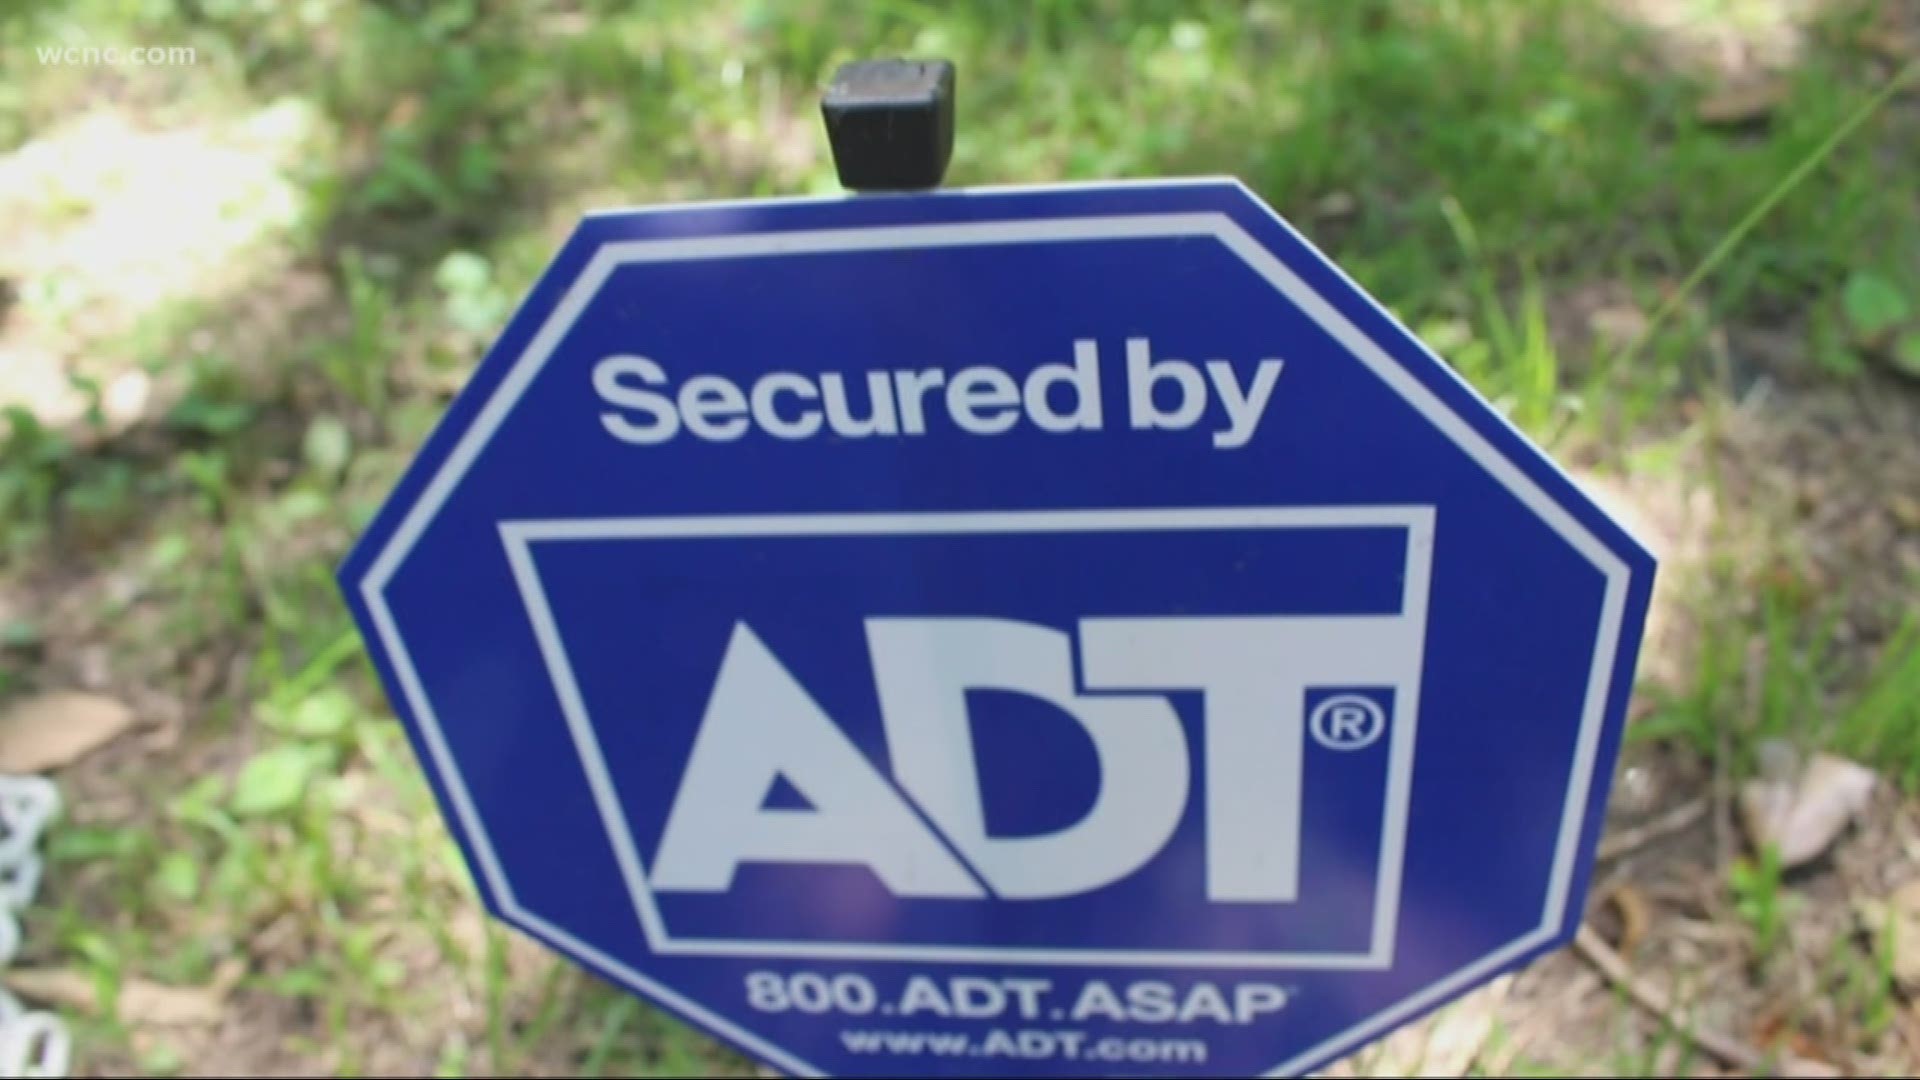 Someone posing as an ADT salesman is heading door to door in our area, asking families about security. They may have a badge or clipboard, but don't be fooled.